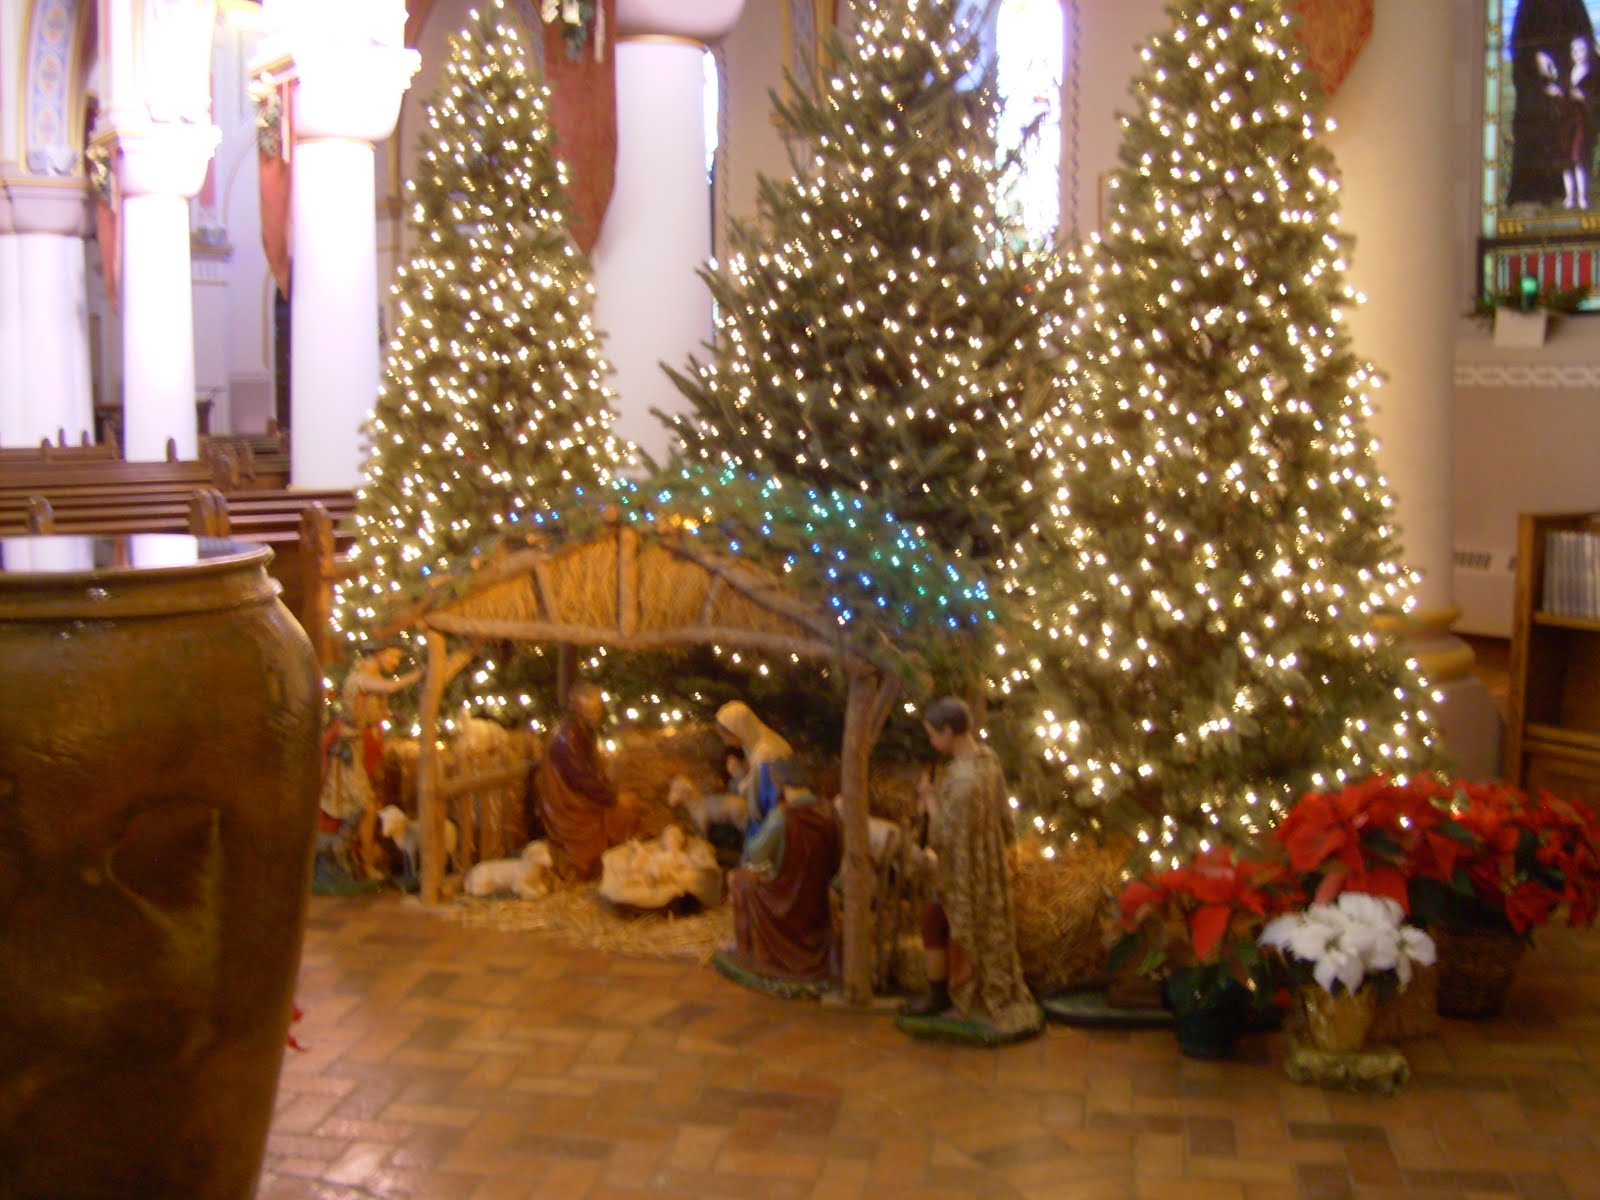 Christmas decorations in the church.